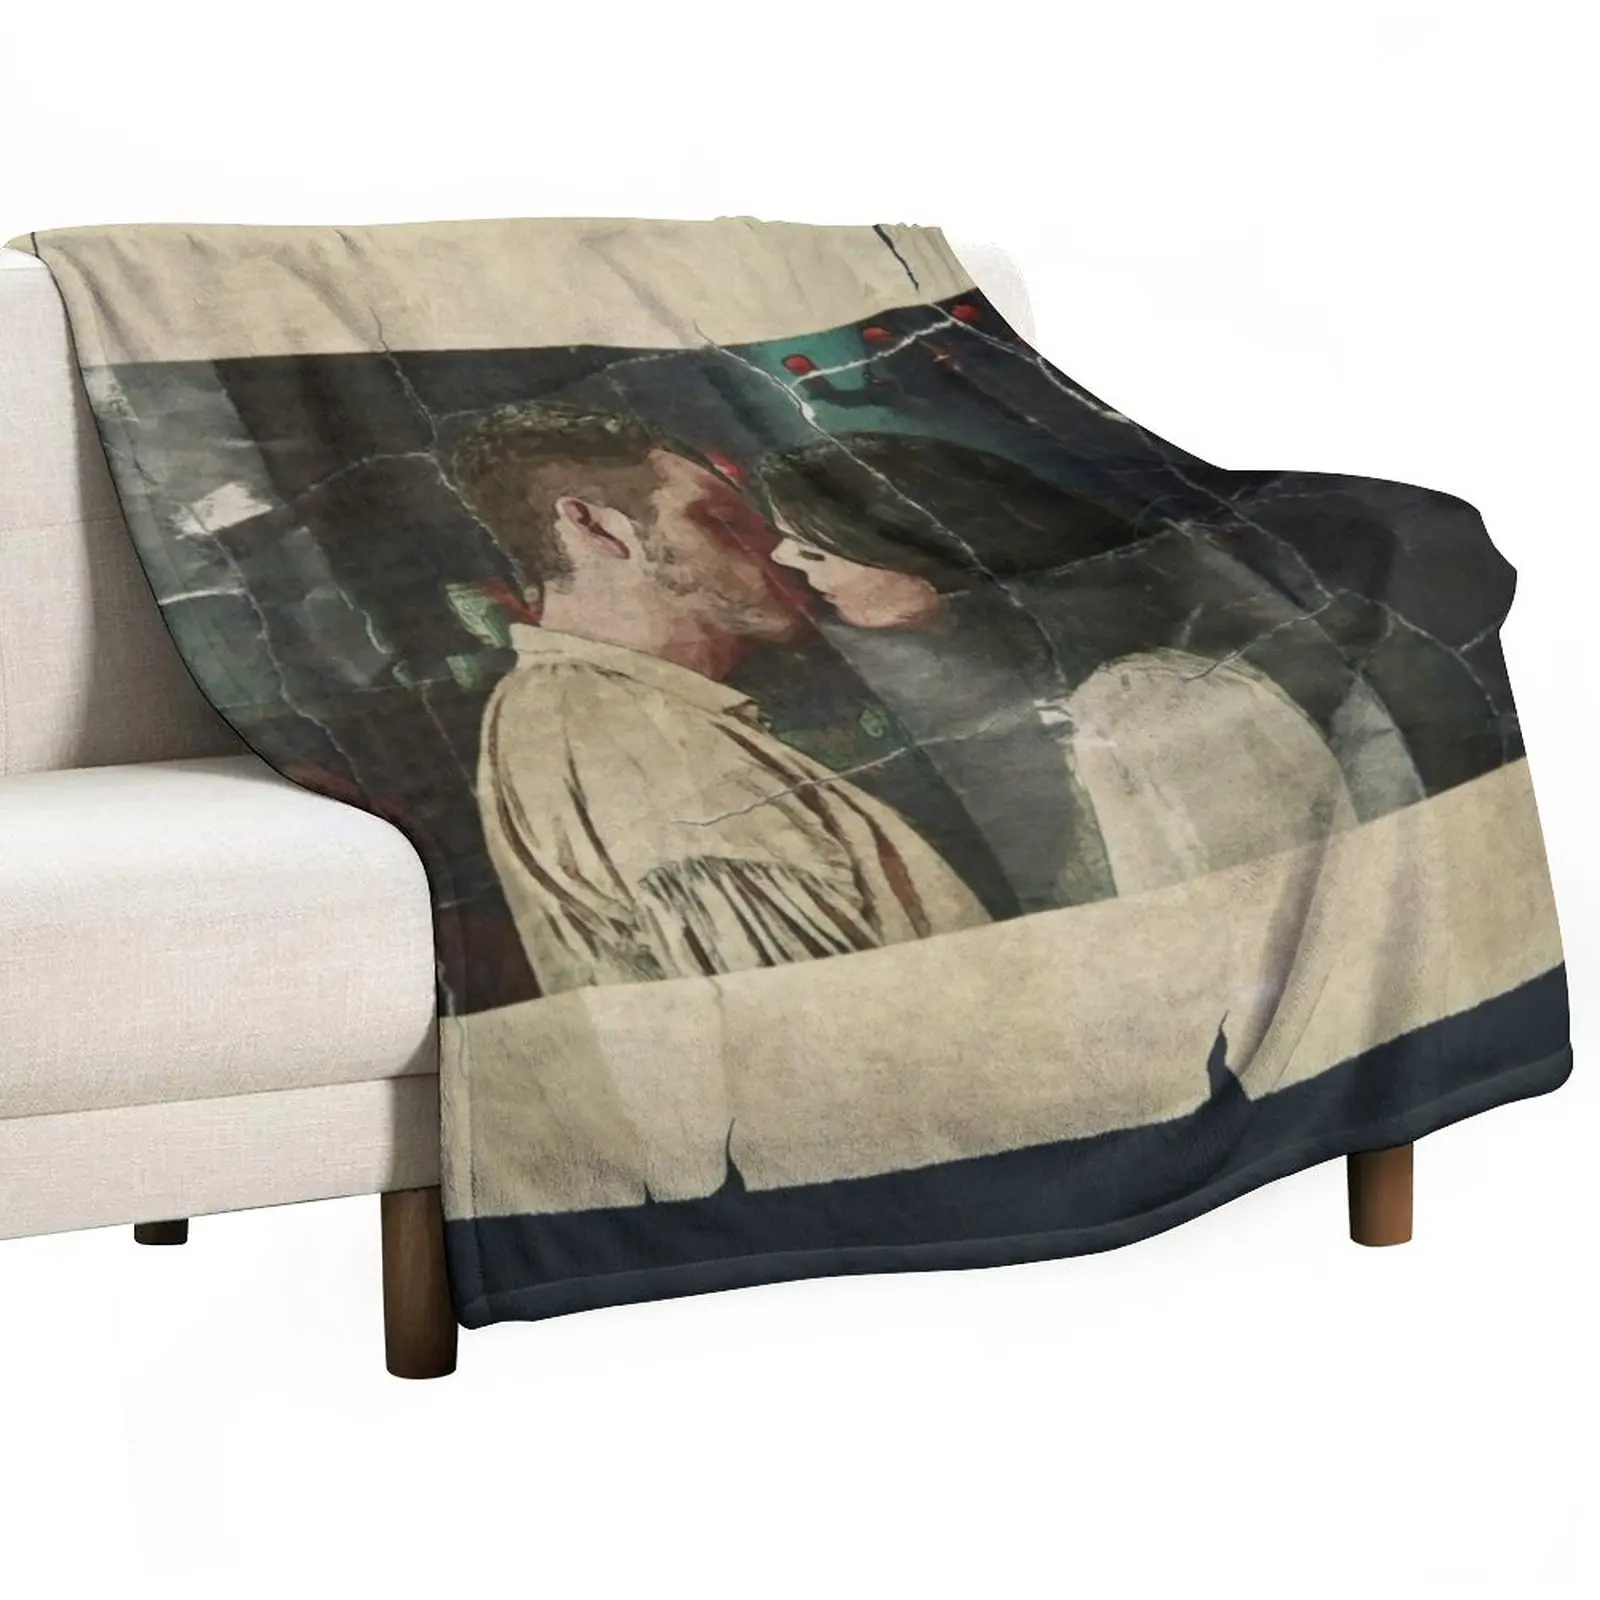 

Outlaw Queen Page 23 Throw Blanket Bed linens Decorative Sofas Beautifuls Blankets